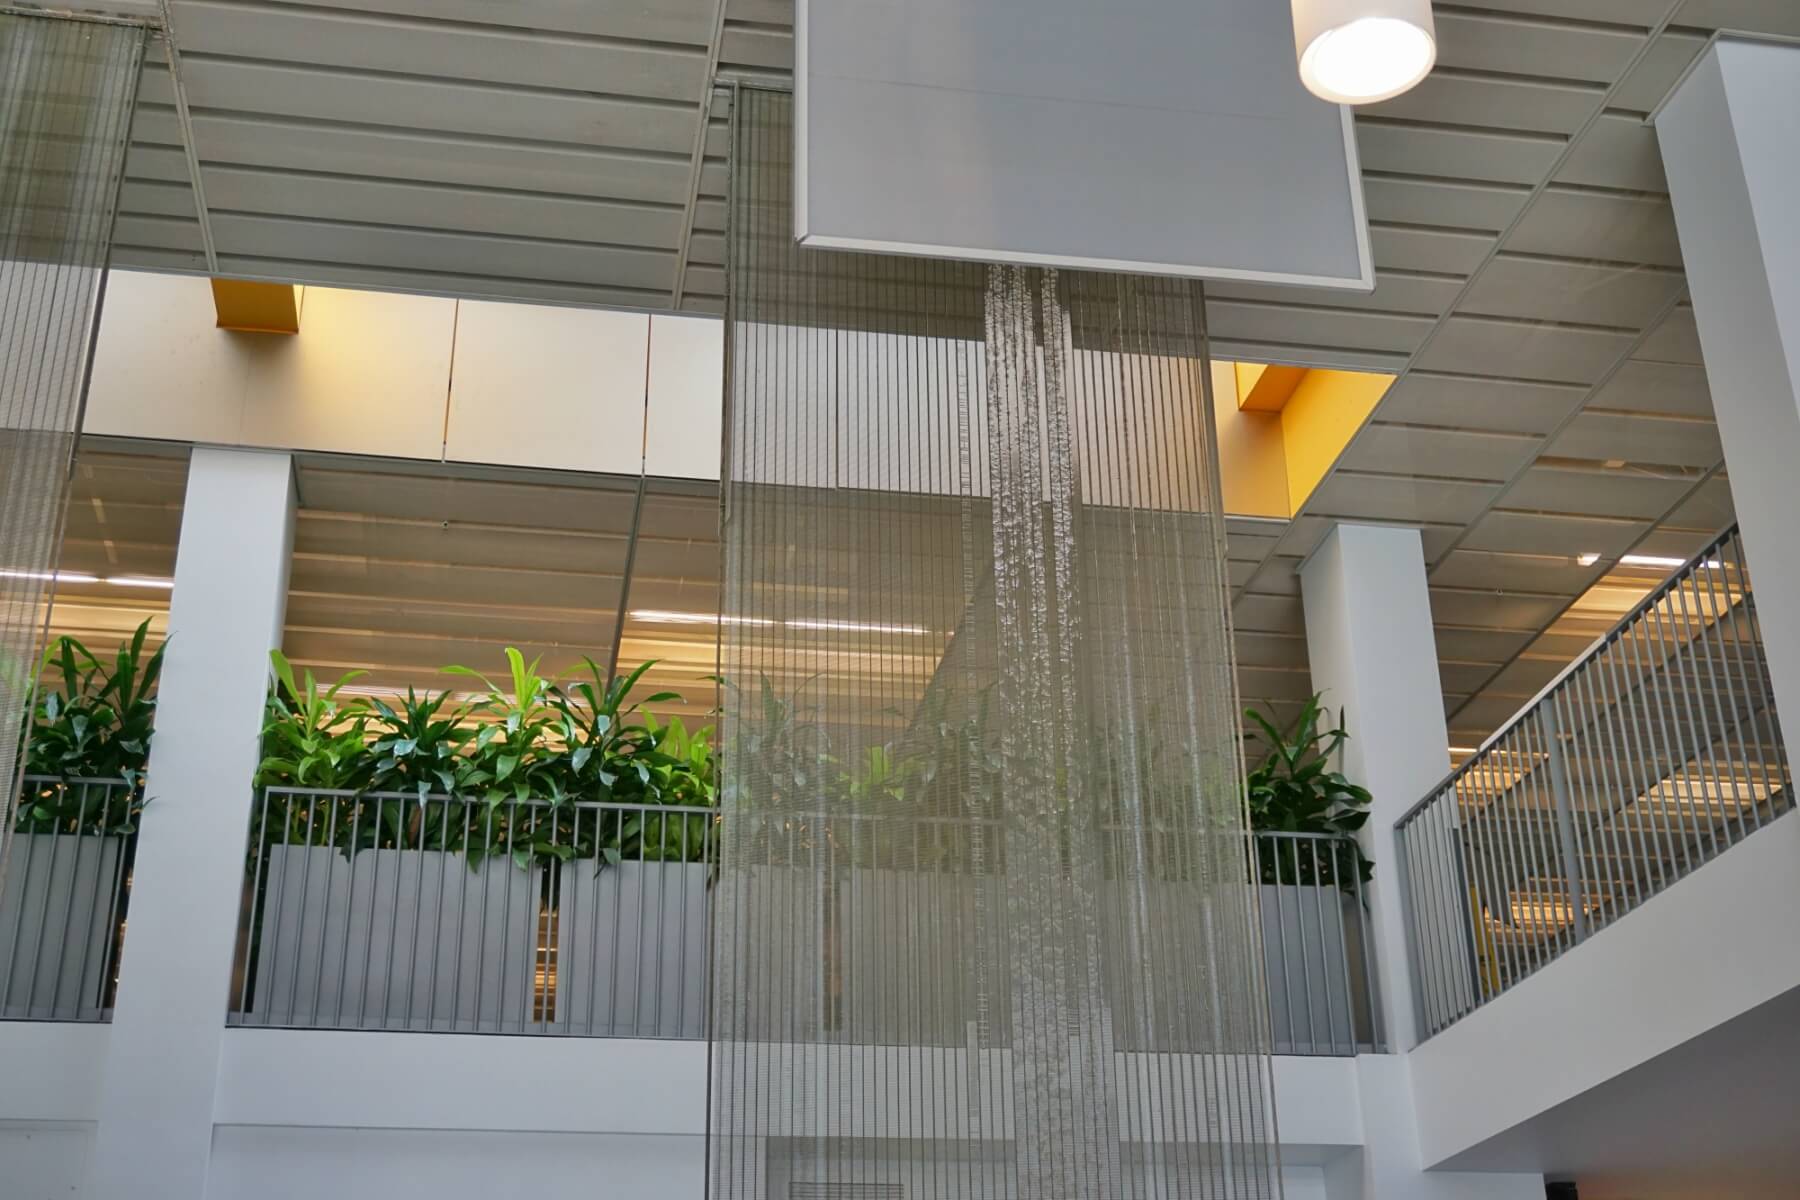 The radiant cooling "waterwalls" inside the Lavin-Bernick Center